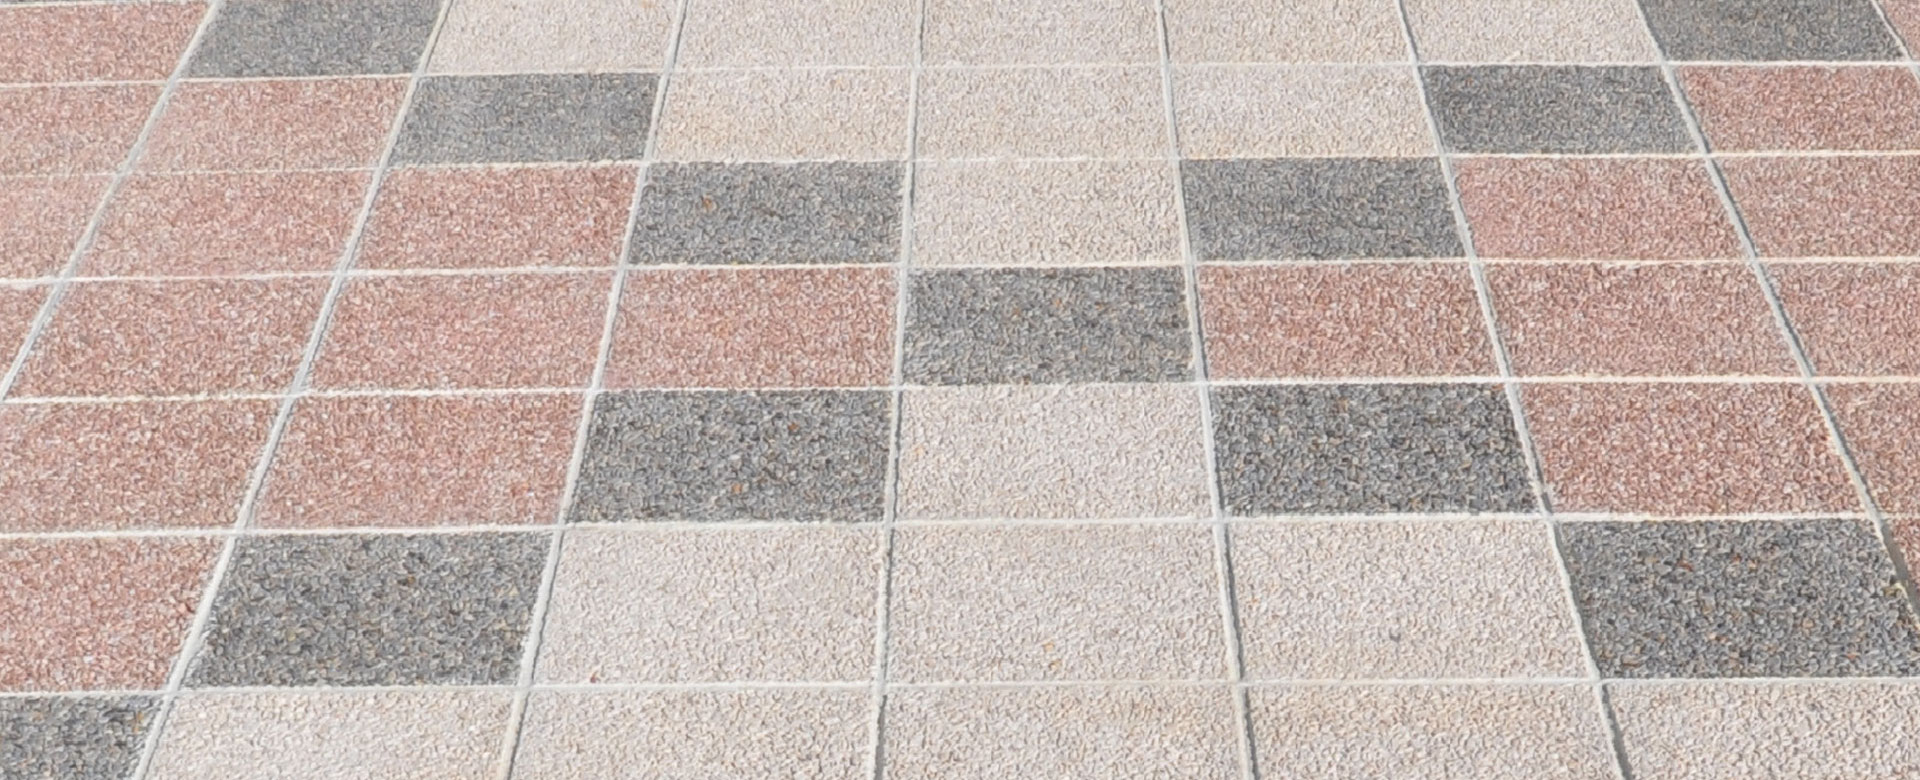 Exposed Aggregate Tiles